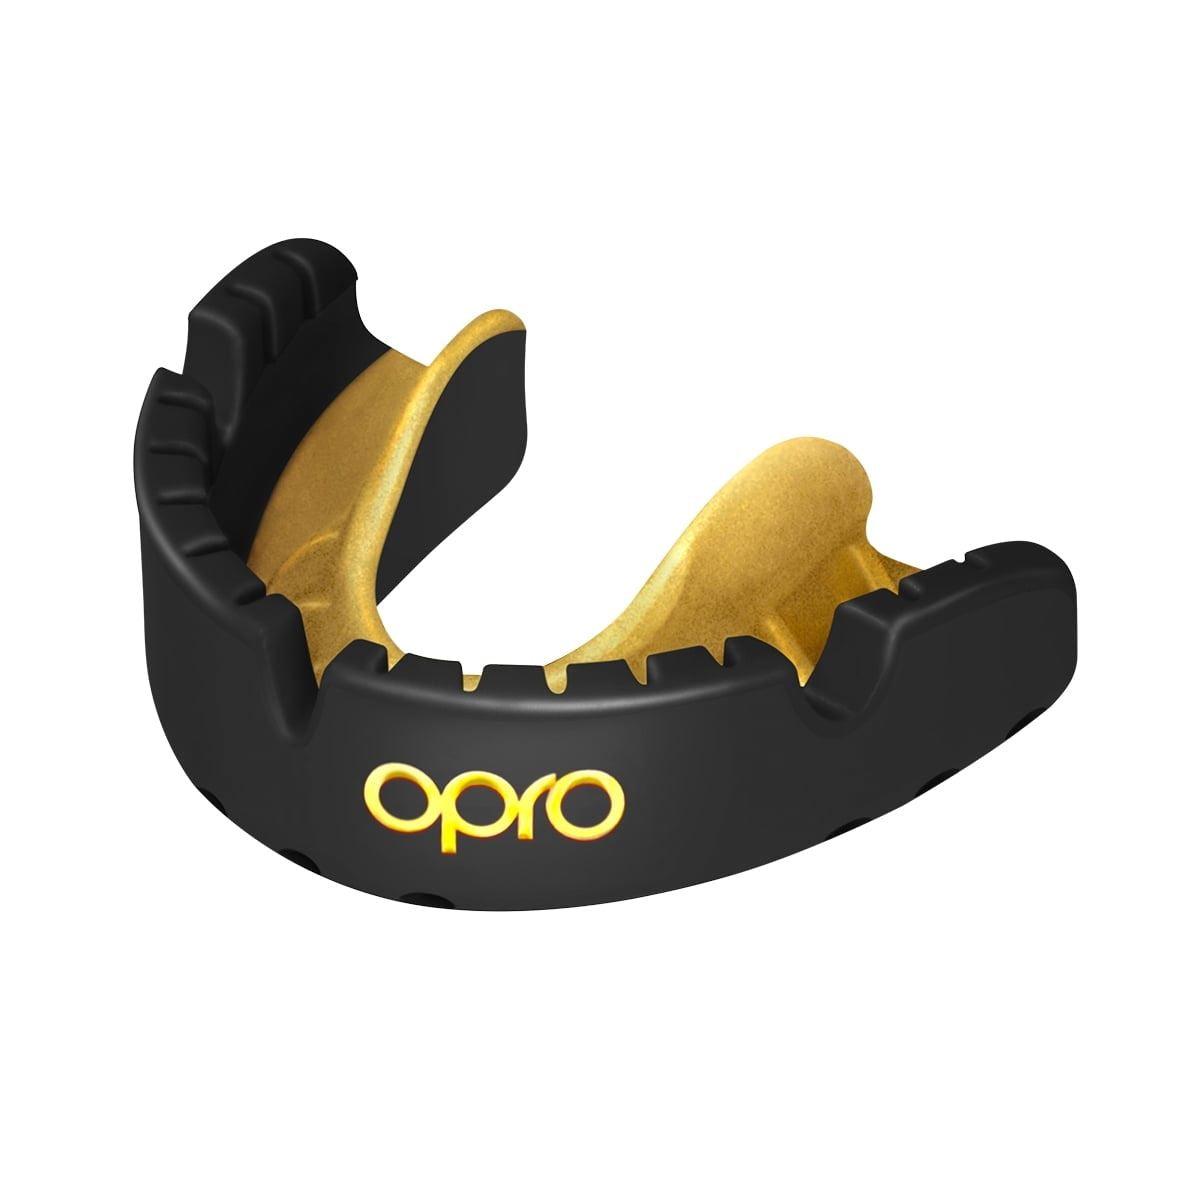 Men's Rugby Protective Mouthguard OPRO Self-Fit Gold Braces 2022 Black/Gold